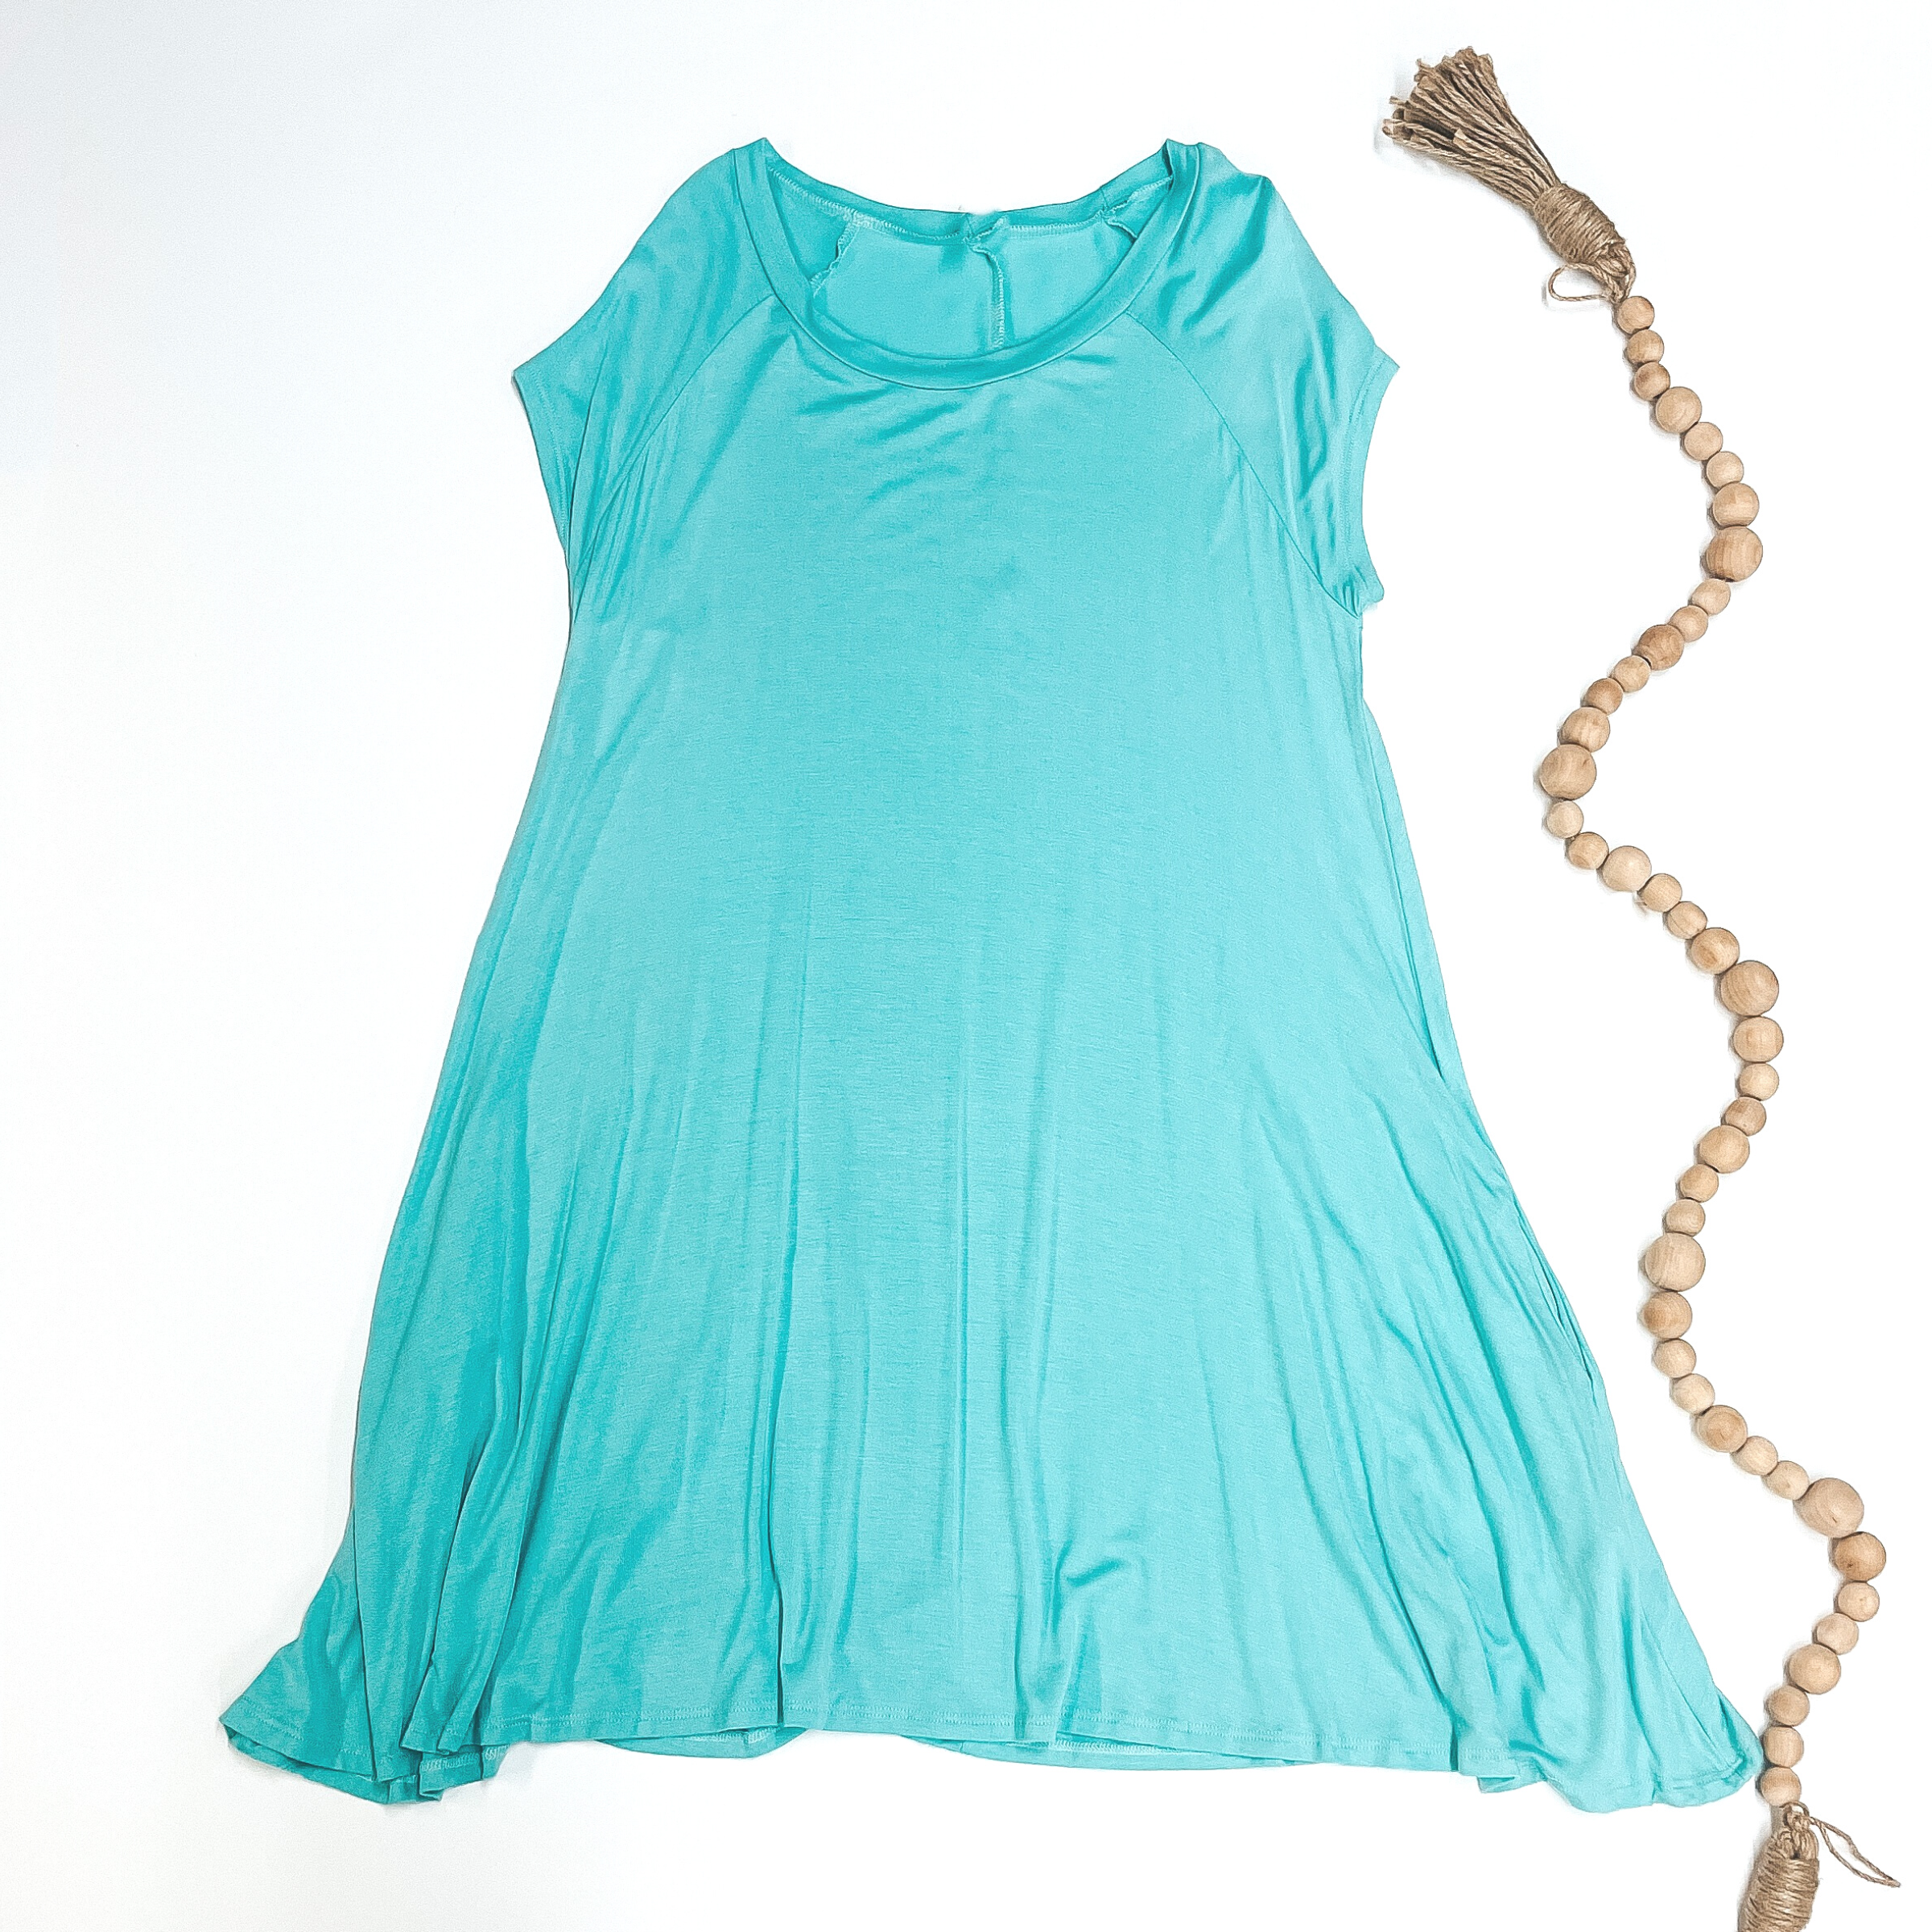 Last Chance Size Small | Mint T-Shirt Dress | ONLY 1 LEFT! - Giddy Up Glamour Boutique